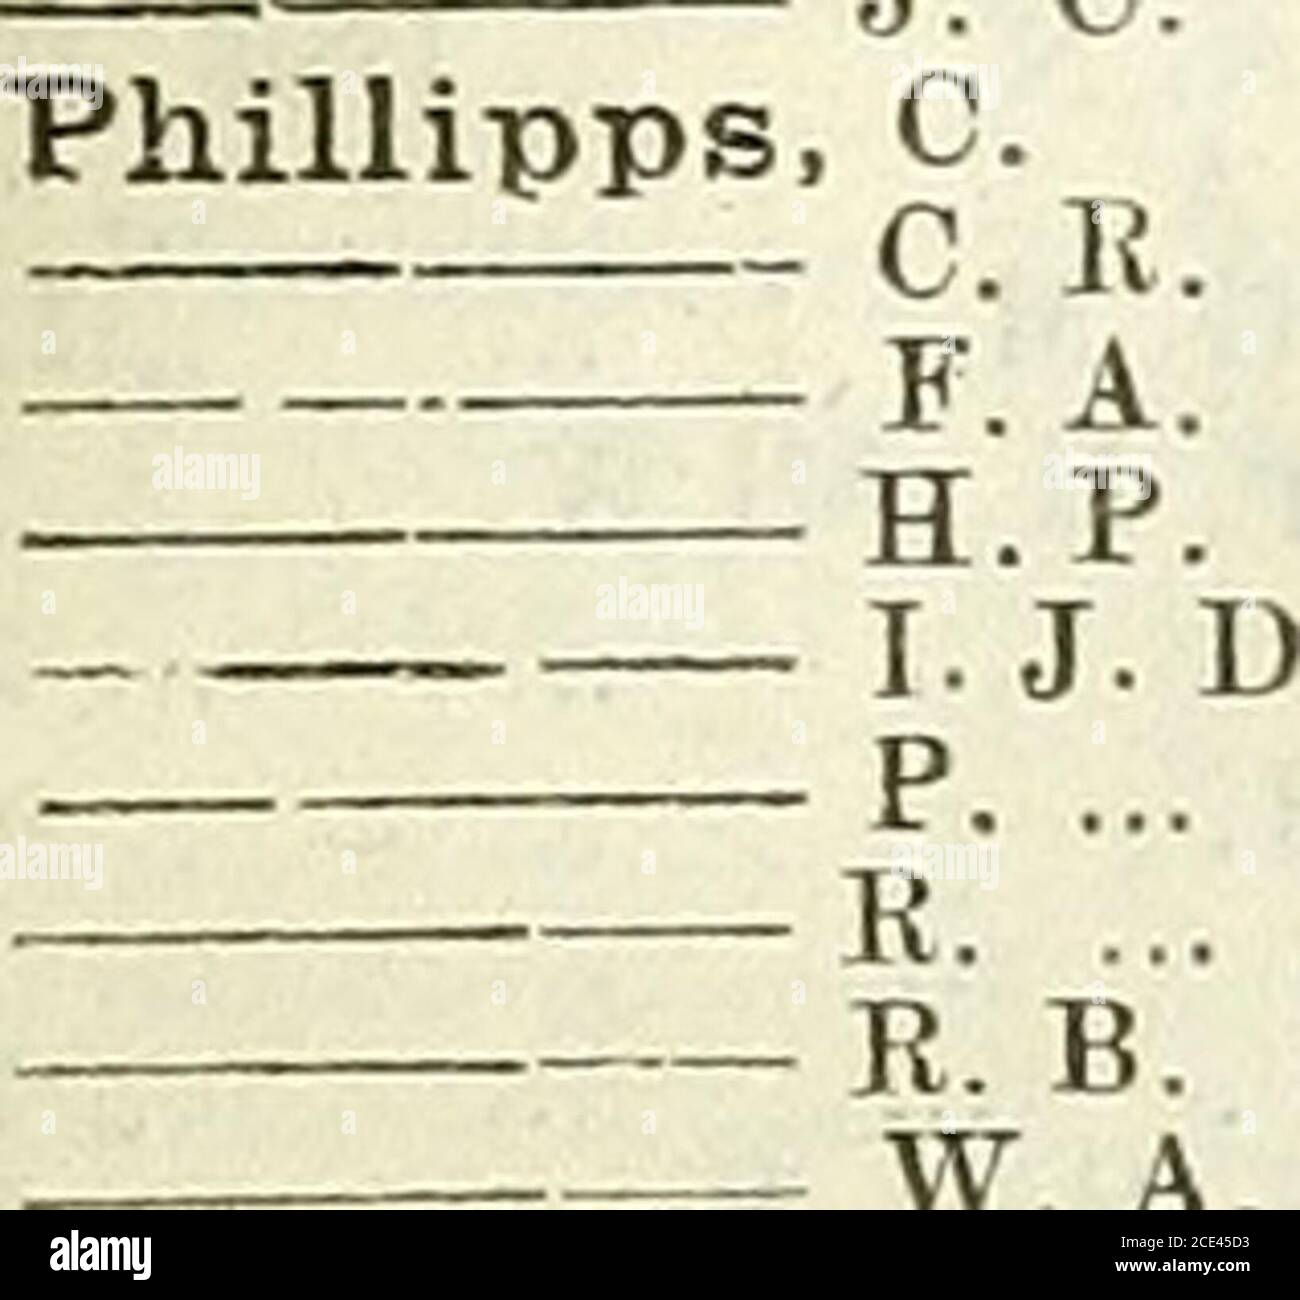 . Army list . Phillimore, P- G. ... R. H. ... - • W. G. .. Phillip, K.W PiiillipDO, A. J. C. B— J. C. ... 547a i...20526 1... 809a ; ... 1934 ; ... 85...1368c ... 2n:i... 351...1285r- 2(..=i26 :... 926ff ... a4.il... 14S9... 2:!1.S ... 2:«:-i ...2jr,2l&gt; i. ... -JSS-i ... £m ... 1535... 809(119.Wa, 2a9P... 2:&lt;1,S...1997rt... 2:«:.... 1931... 19:!0... 495av2i7.. 263»... 795«... 213/...1023«...1527«... 1199... 596... 442&lt;(...2U12C...20.526...1277a, 15566... 192... 19.59...12926... 1970...209ia... 189 12236 ... 853... 24i:!... 172S... 2.H68... 918 1308 ...19.52a... 1749... 24.51... 856fl, Stock Photo